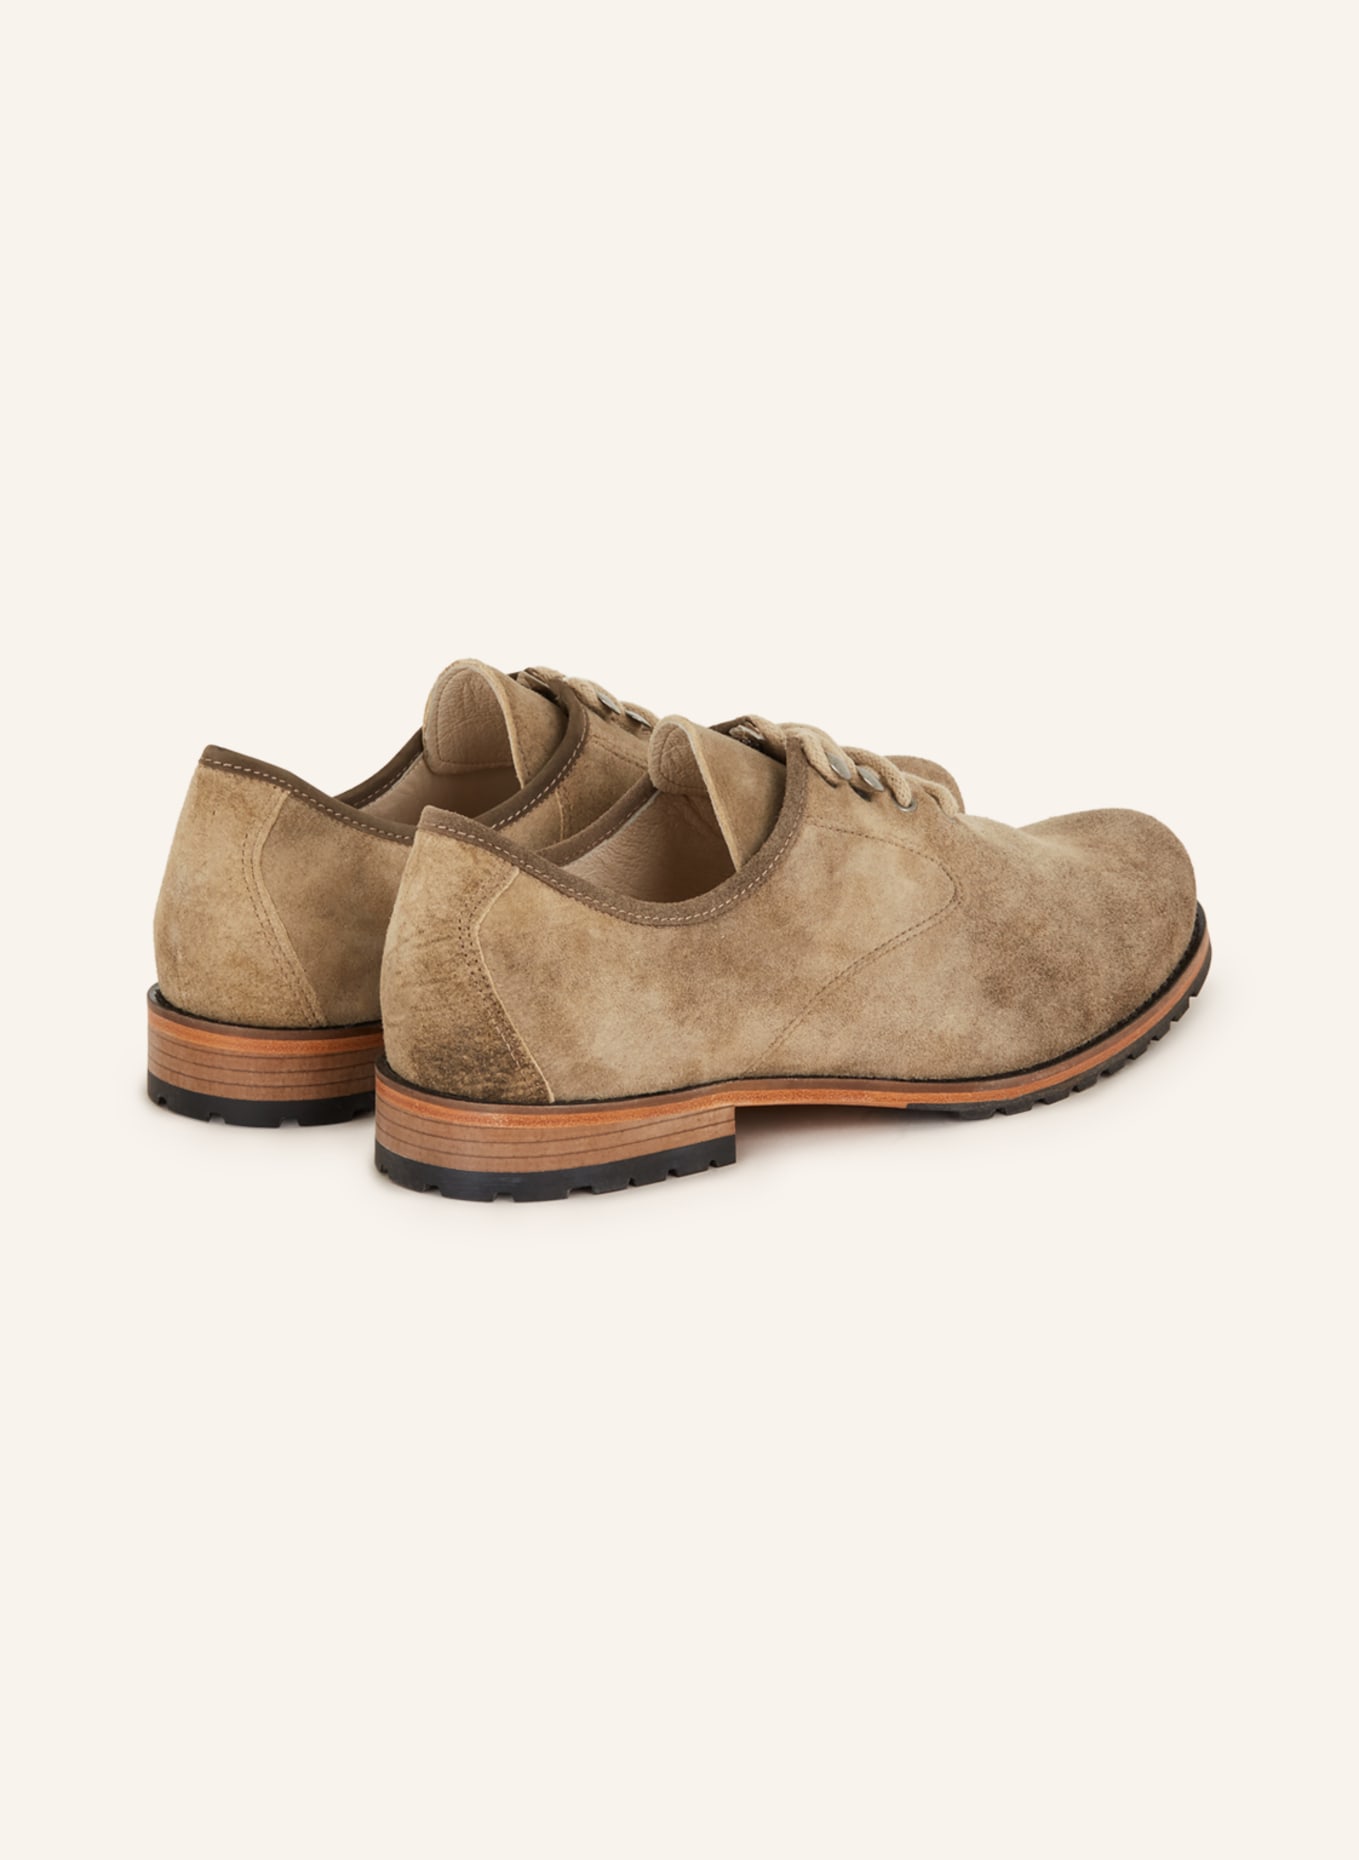 OSTARRICHI Haferl shoes, Color: LIGHT BROWN (Image 2)